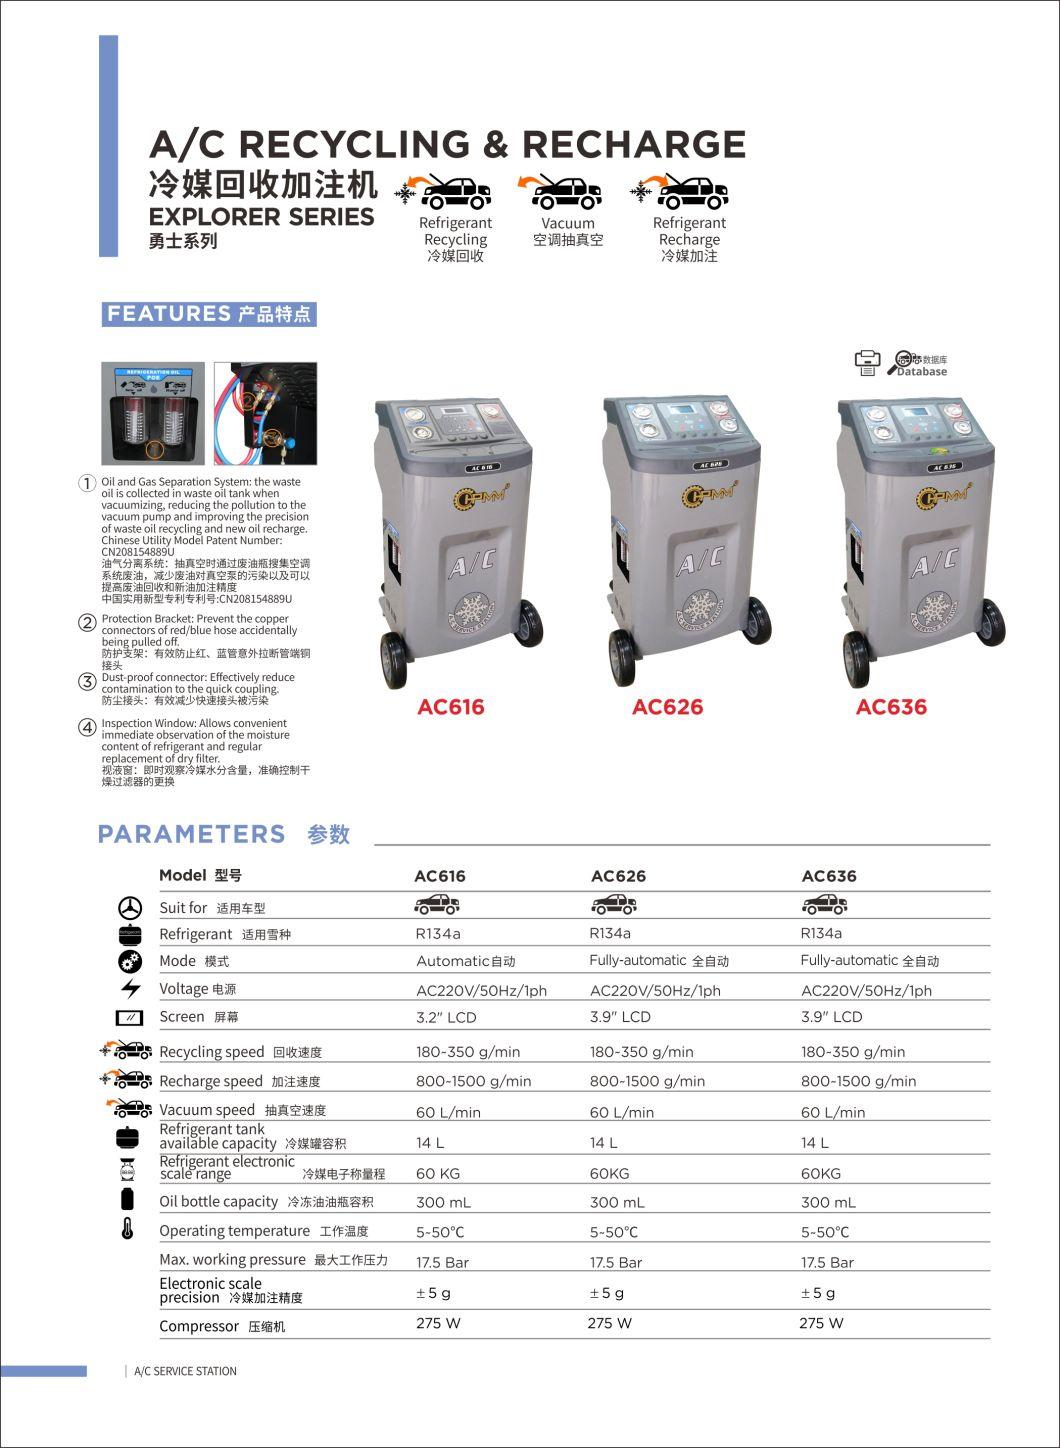 A/C Recovery Machine AC636 A/C Recycling & Recharger R-134A Refrigerant Recovery, Recycling and Recharging Machine